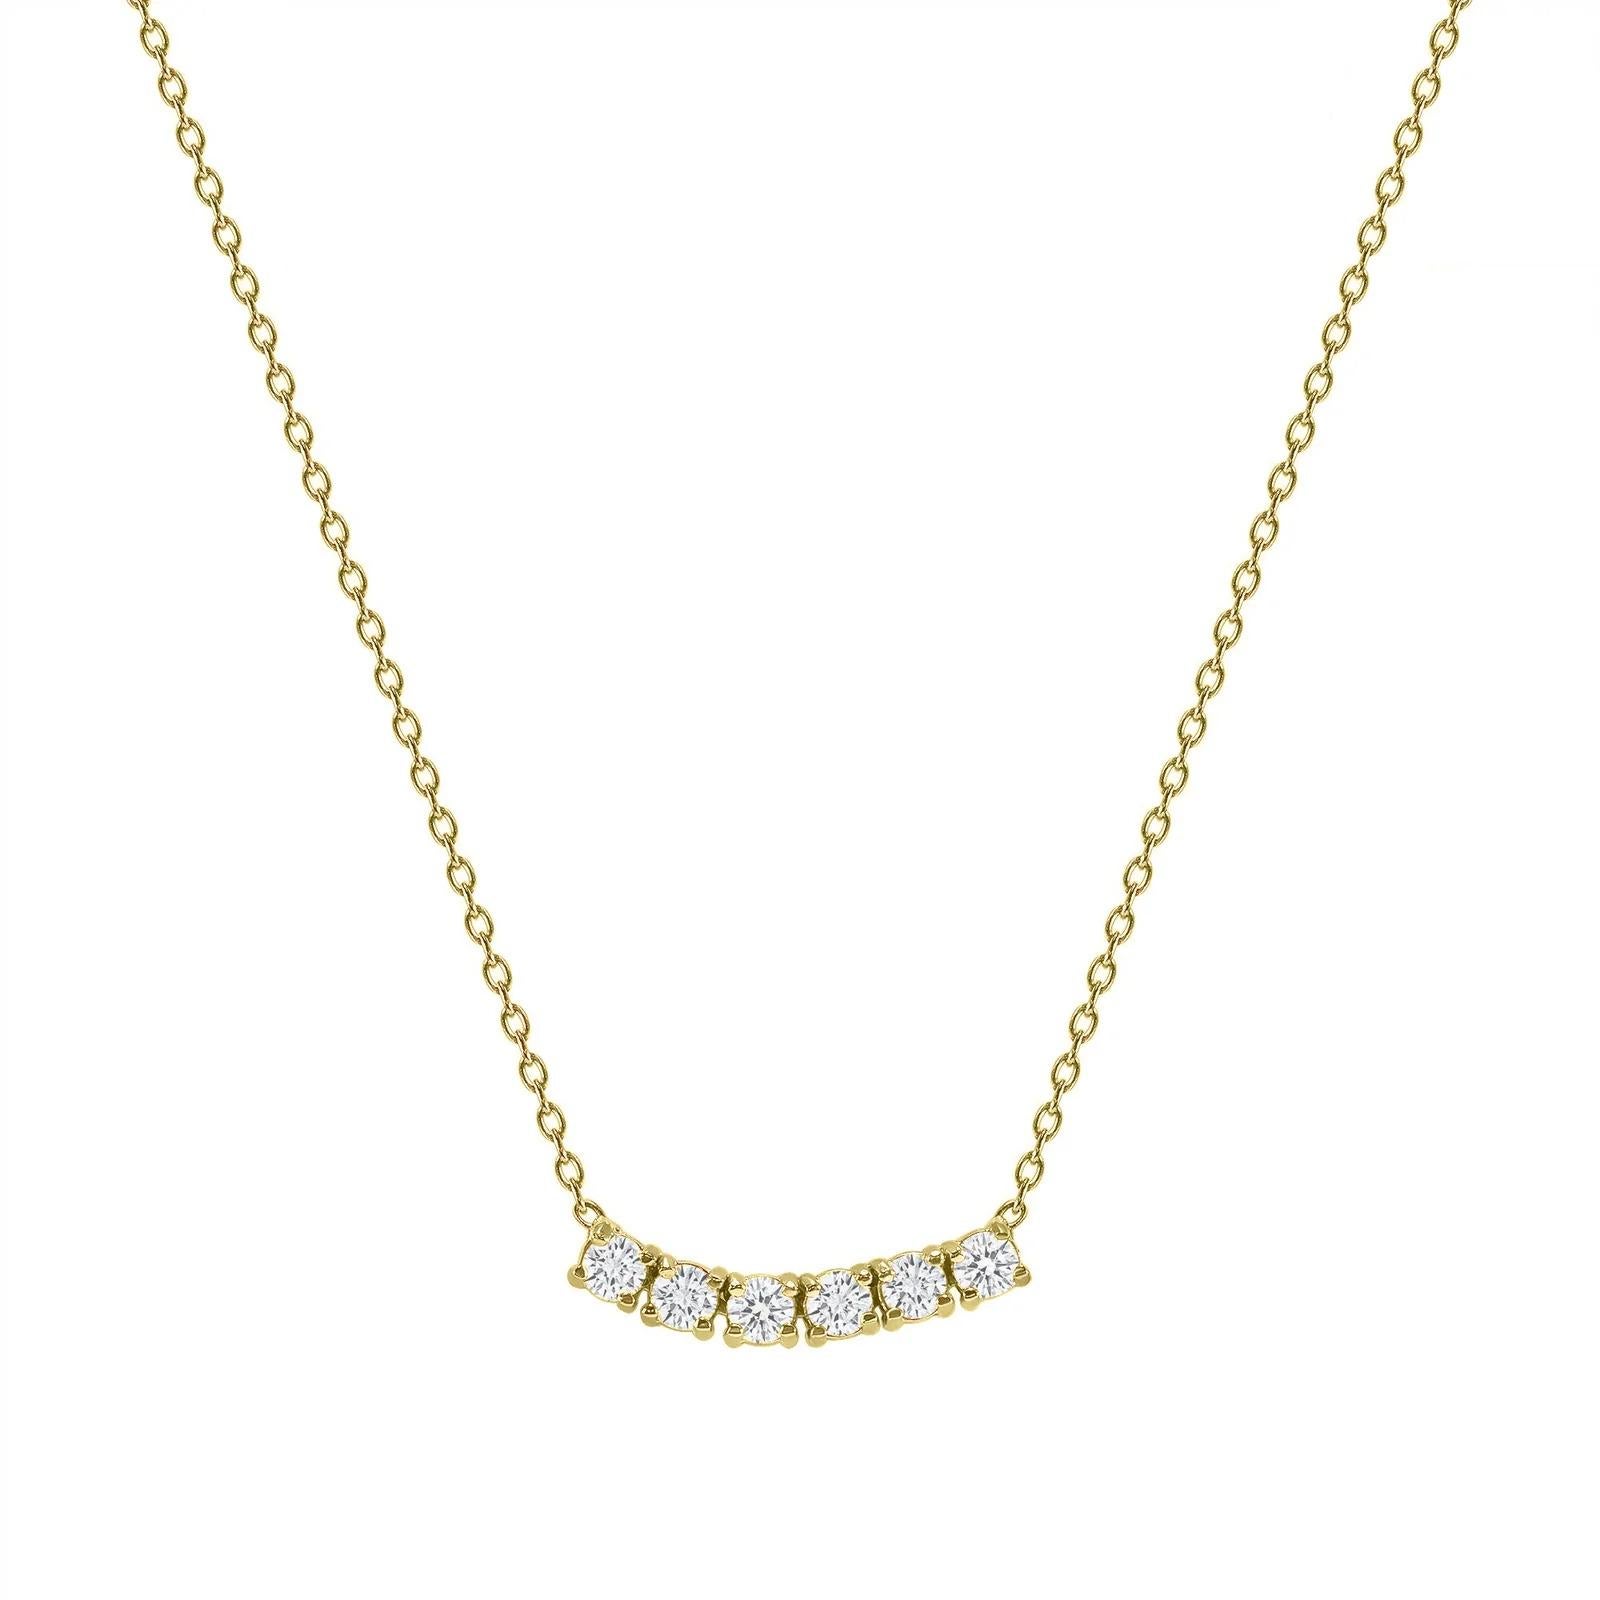 This petite, curved diamond necklace is crafted with gorgeous 14k gold set with six round diamonds.  

Gold: 14k 
Diamond Total Carats: 0.25 ct
Diamond Cut: Round (6 diamonds)
Diamond Clarity: VS
Diamond Color: F
Color: Yellow Gold
Necklace Length: